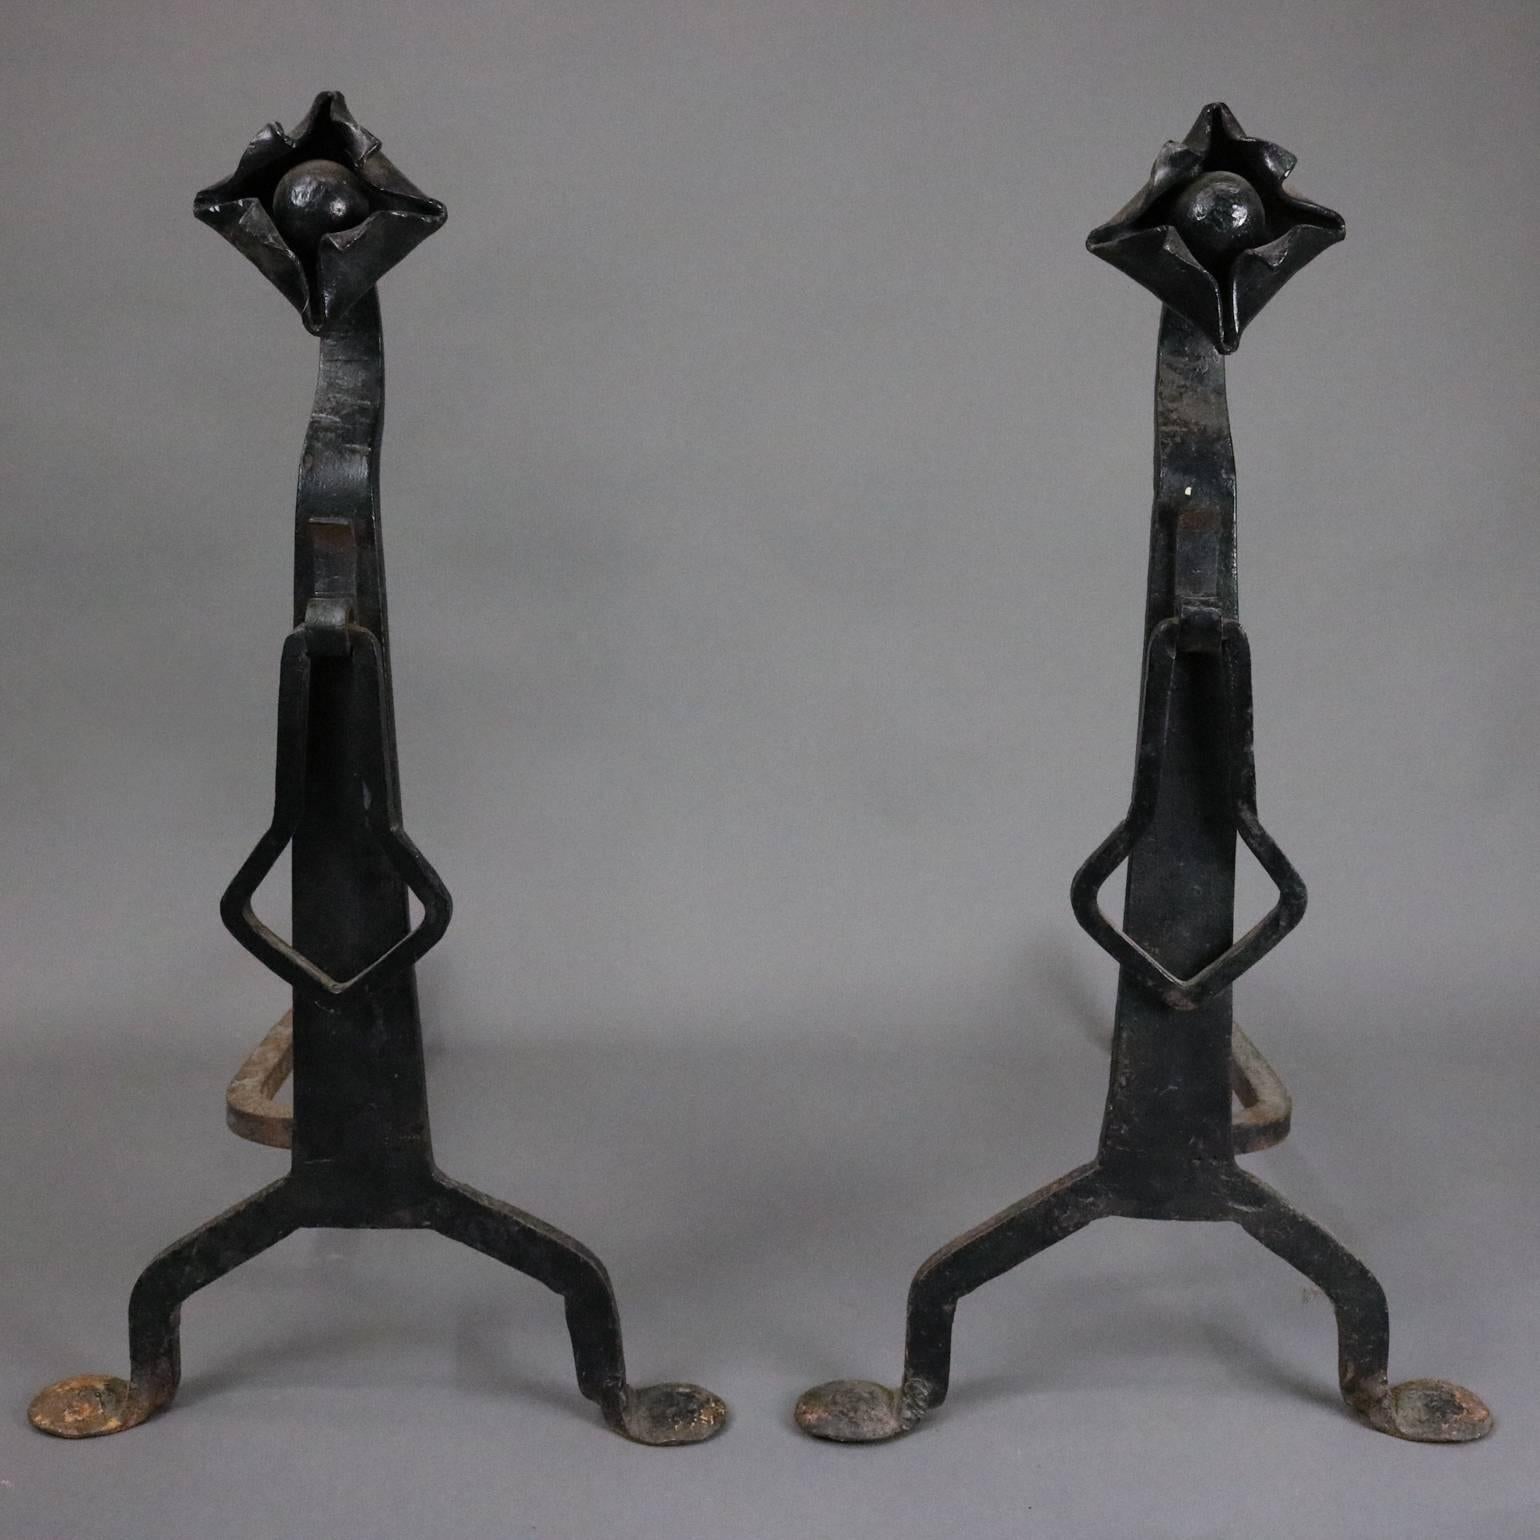 Pair of antique Yellin School Arts & Crafts wrought iron fire place andirons feature stylized flower finial, shaft ring, and are seated on splayed legs, circa 1910

***DELIVERY NOTICE – Due to COVID-19 we are employing NO-CONTACT PRACTICES in the